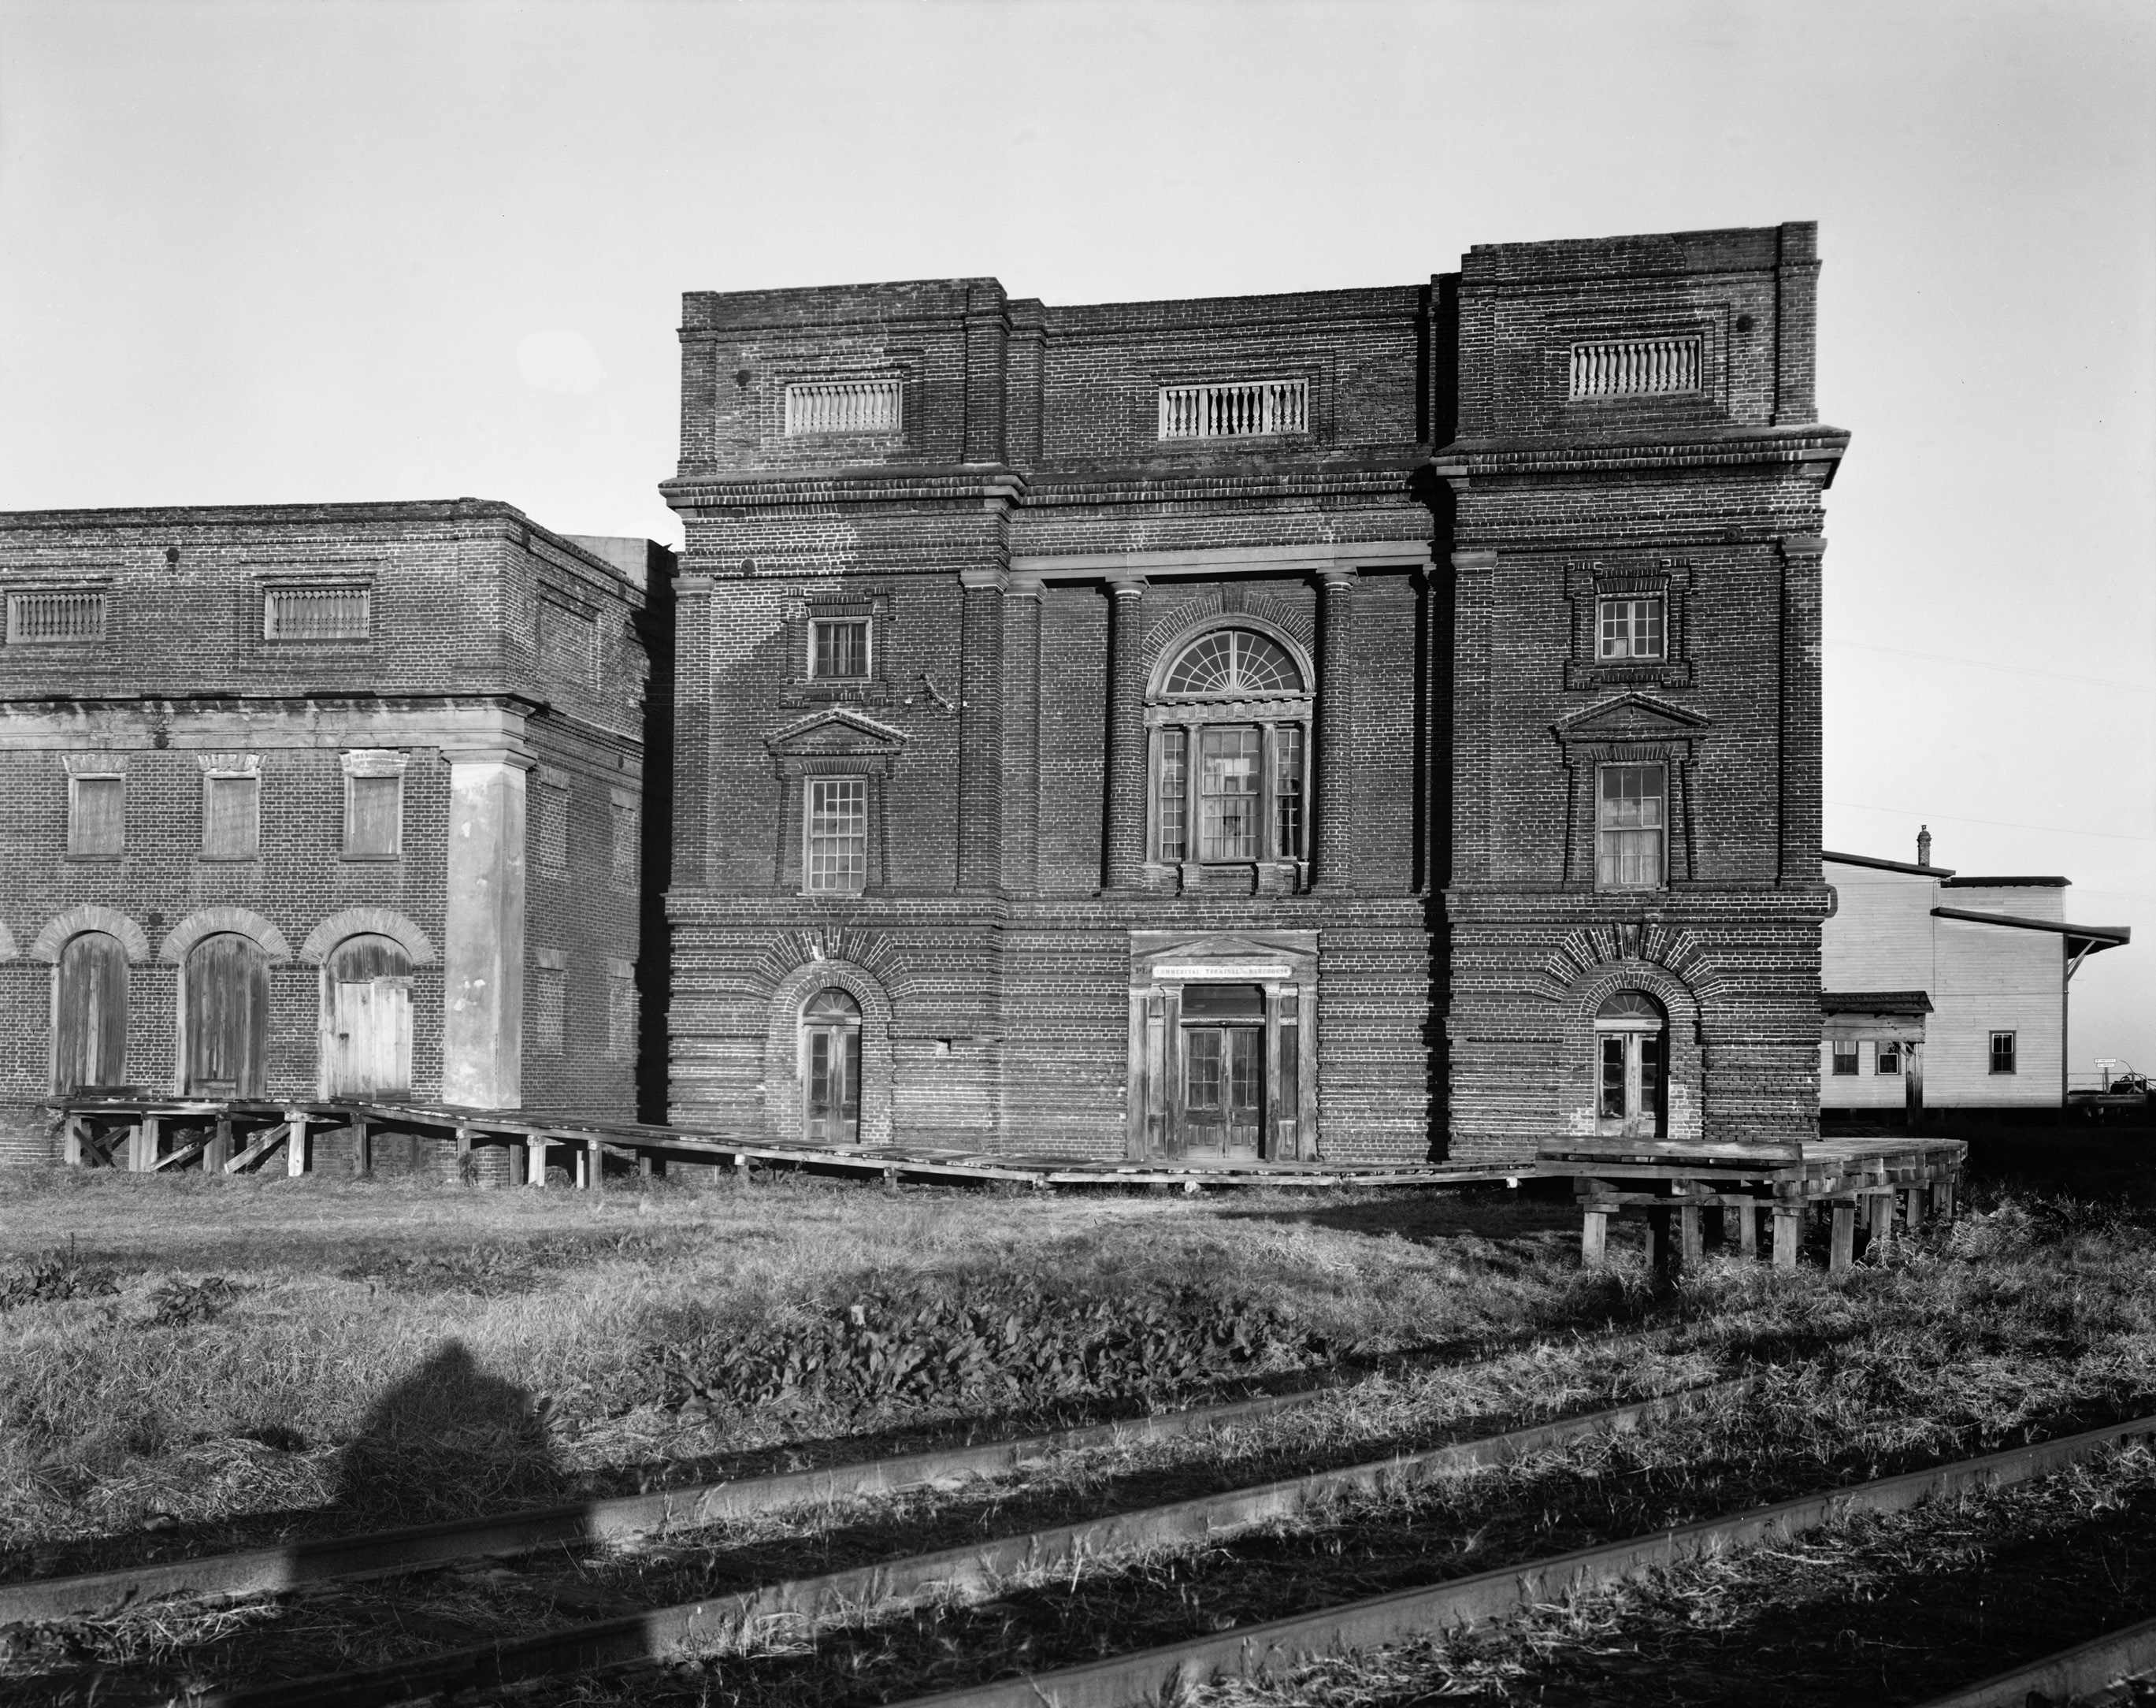 Bennett’s wealth allowed him to create a building for milling rice that was both utilitarian and a masterpiece blending Classical Revival and Italian Renaissance styles. Bennett Rice Mill, circa 1937,  by Frances Benjamin Johnston